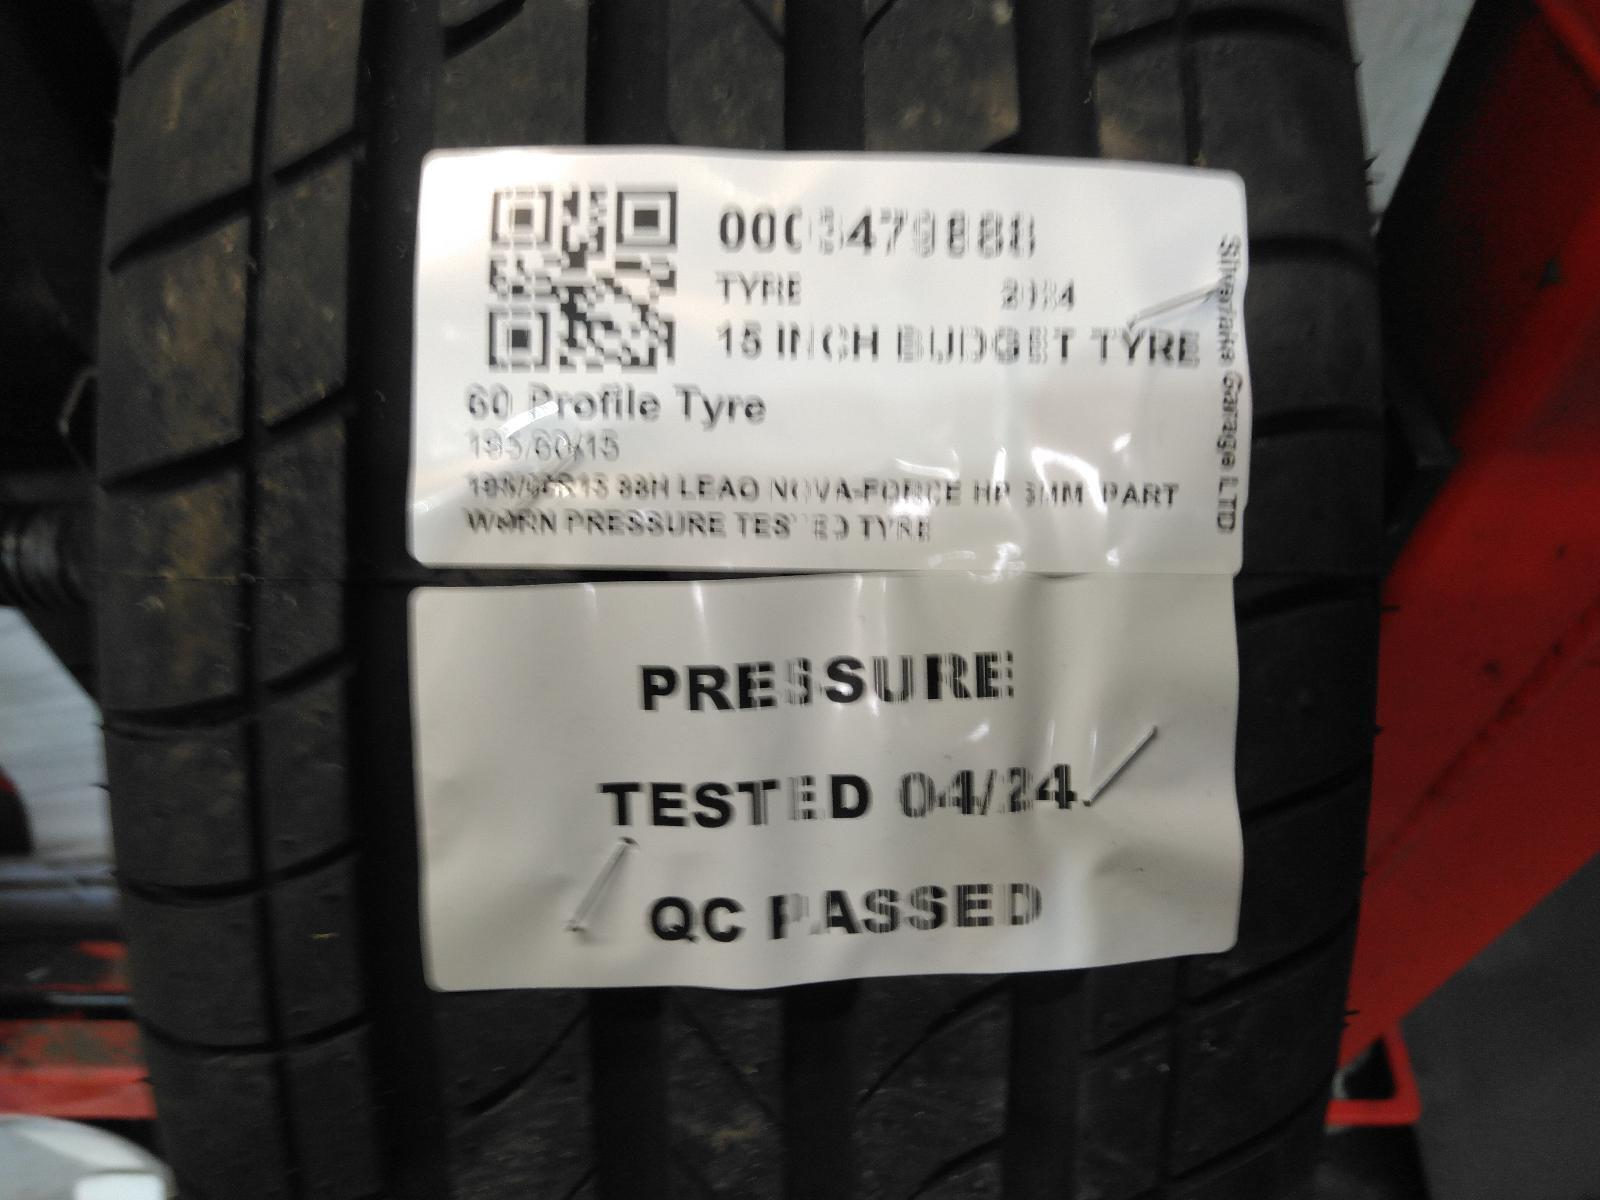 195/60R15 88H LEAO NOVA-FORCE HP 6MM  PART WORN PRESSURE TESTED TYRE